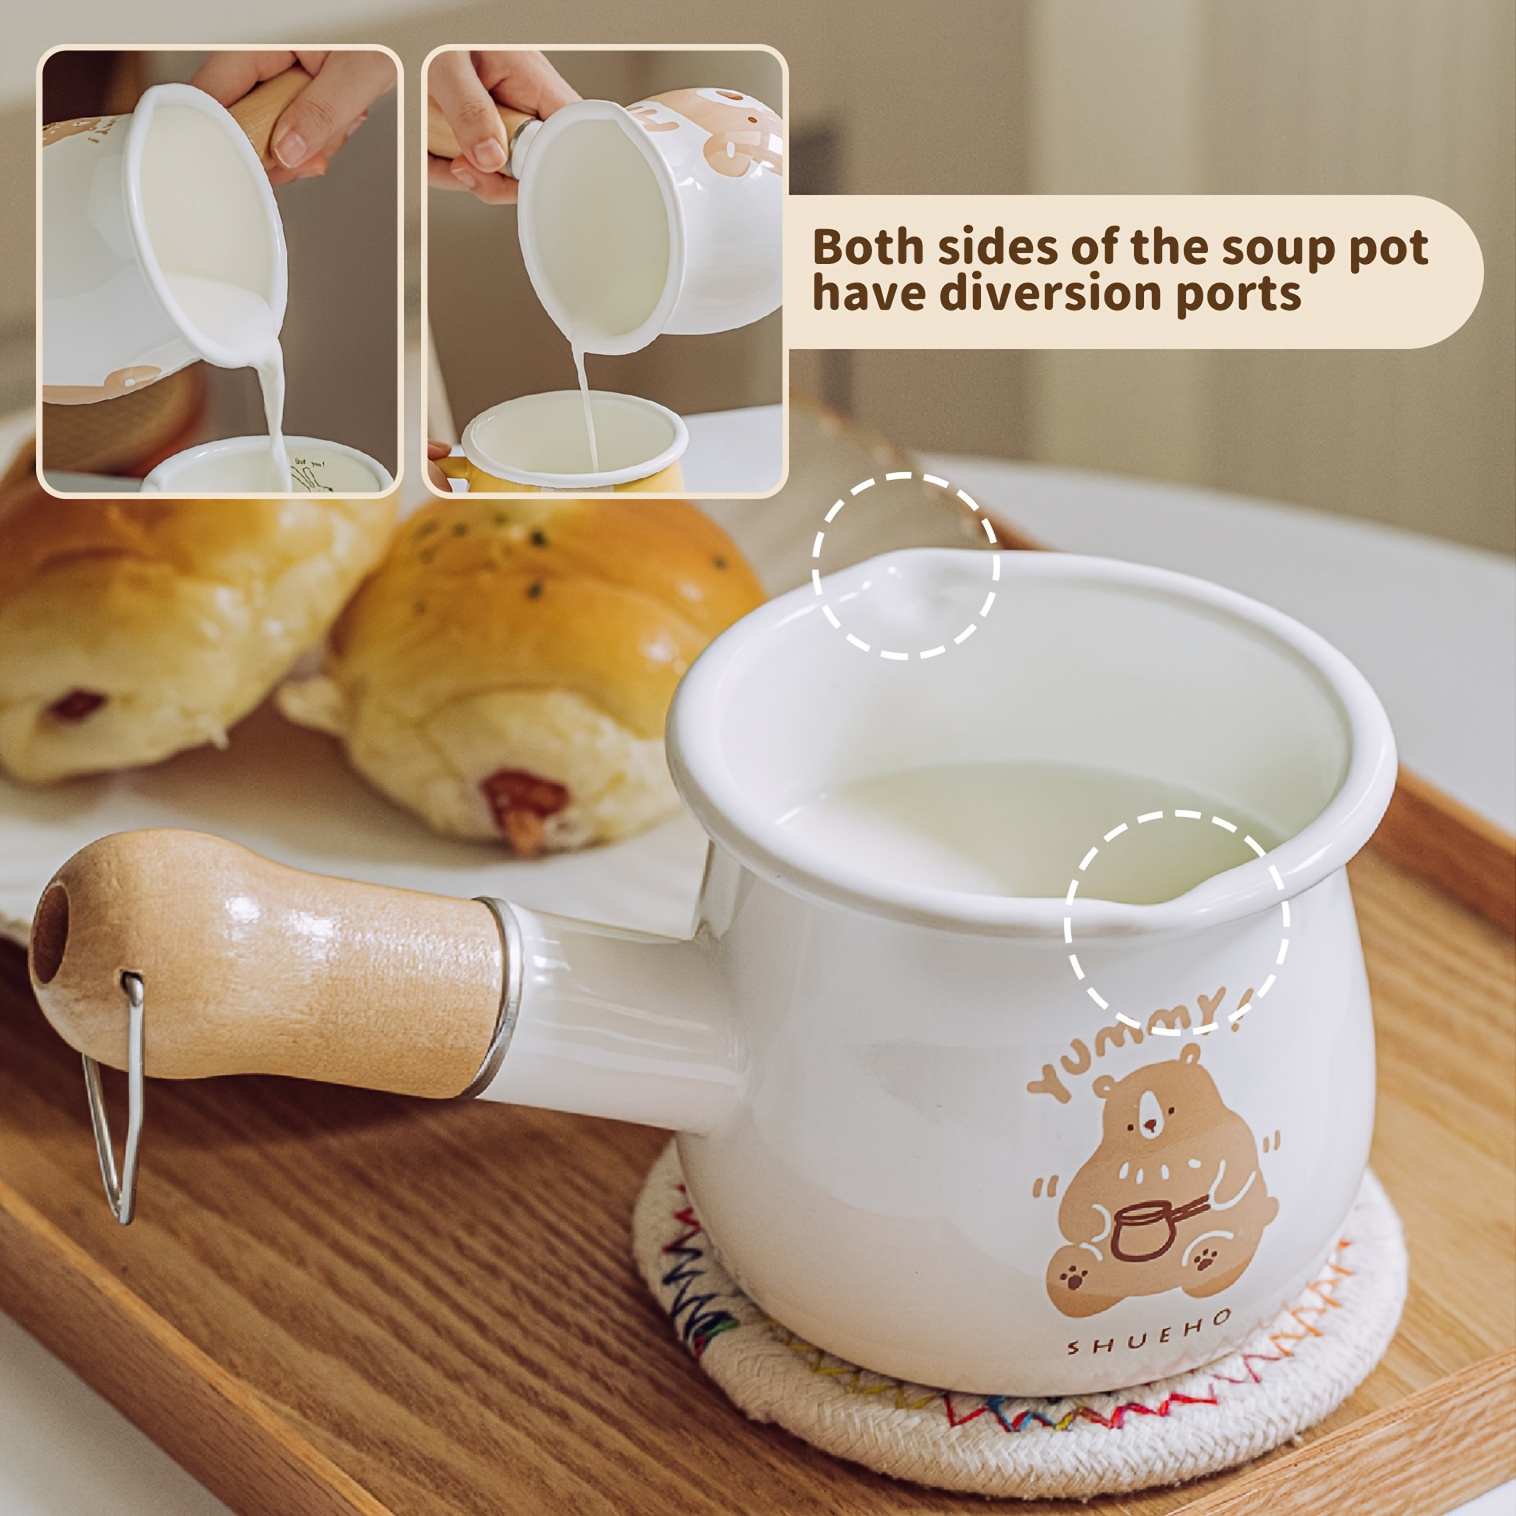 Cute Bear Pattern Butter Warmer, Enamelware Saucepan Small Cookware With  Wooden Handle, For Heating Smaller Liquid Portions